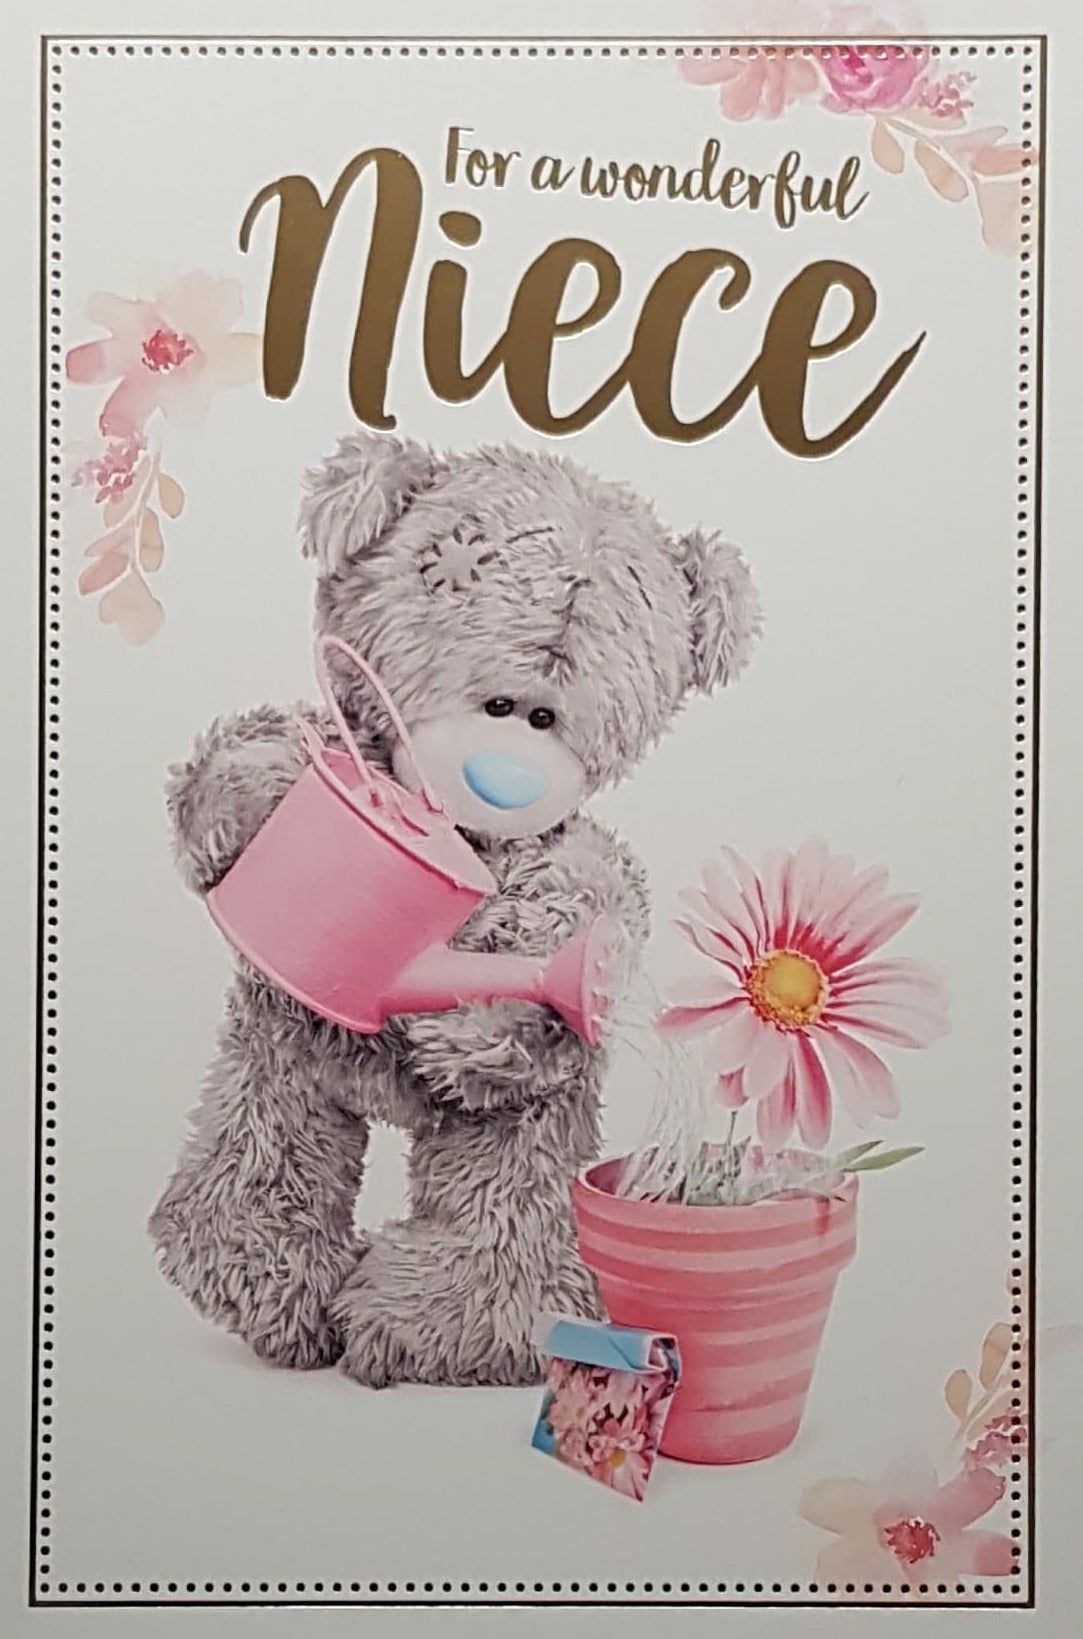 Birthday Card - Niece / Fluffy Teddy Watering A Pink Potted Flower